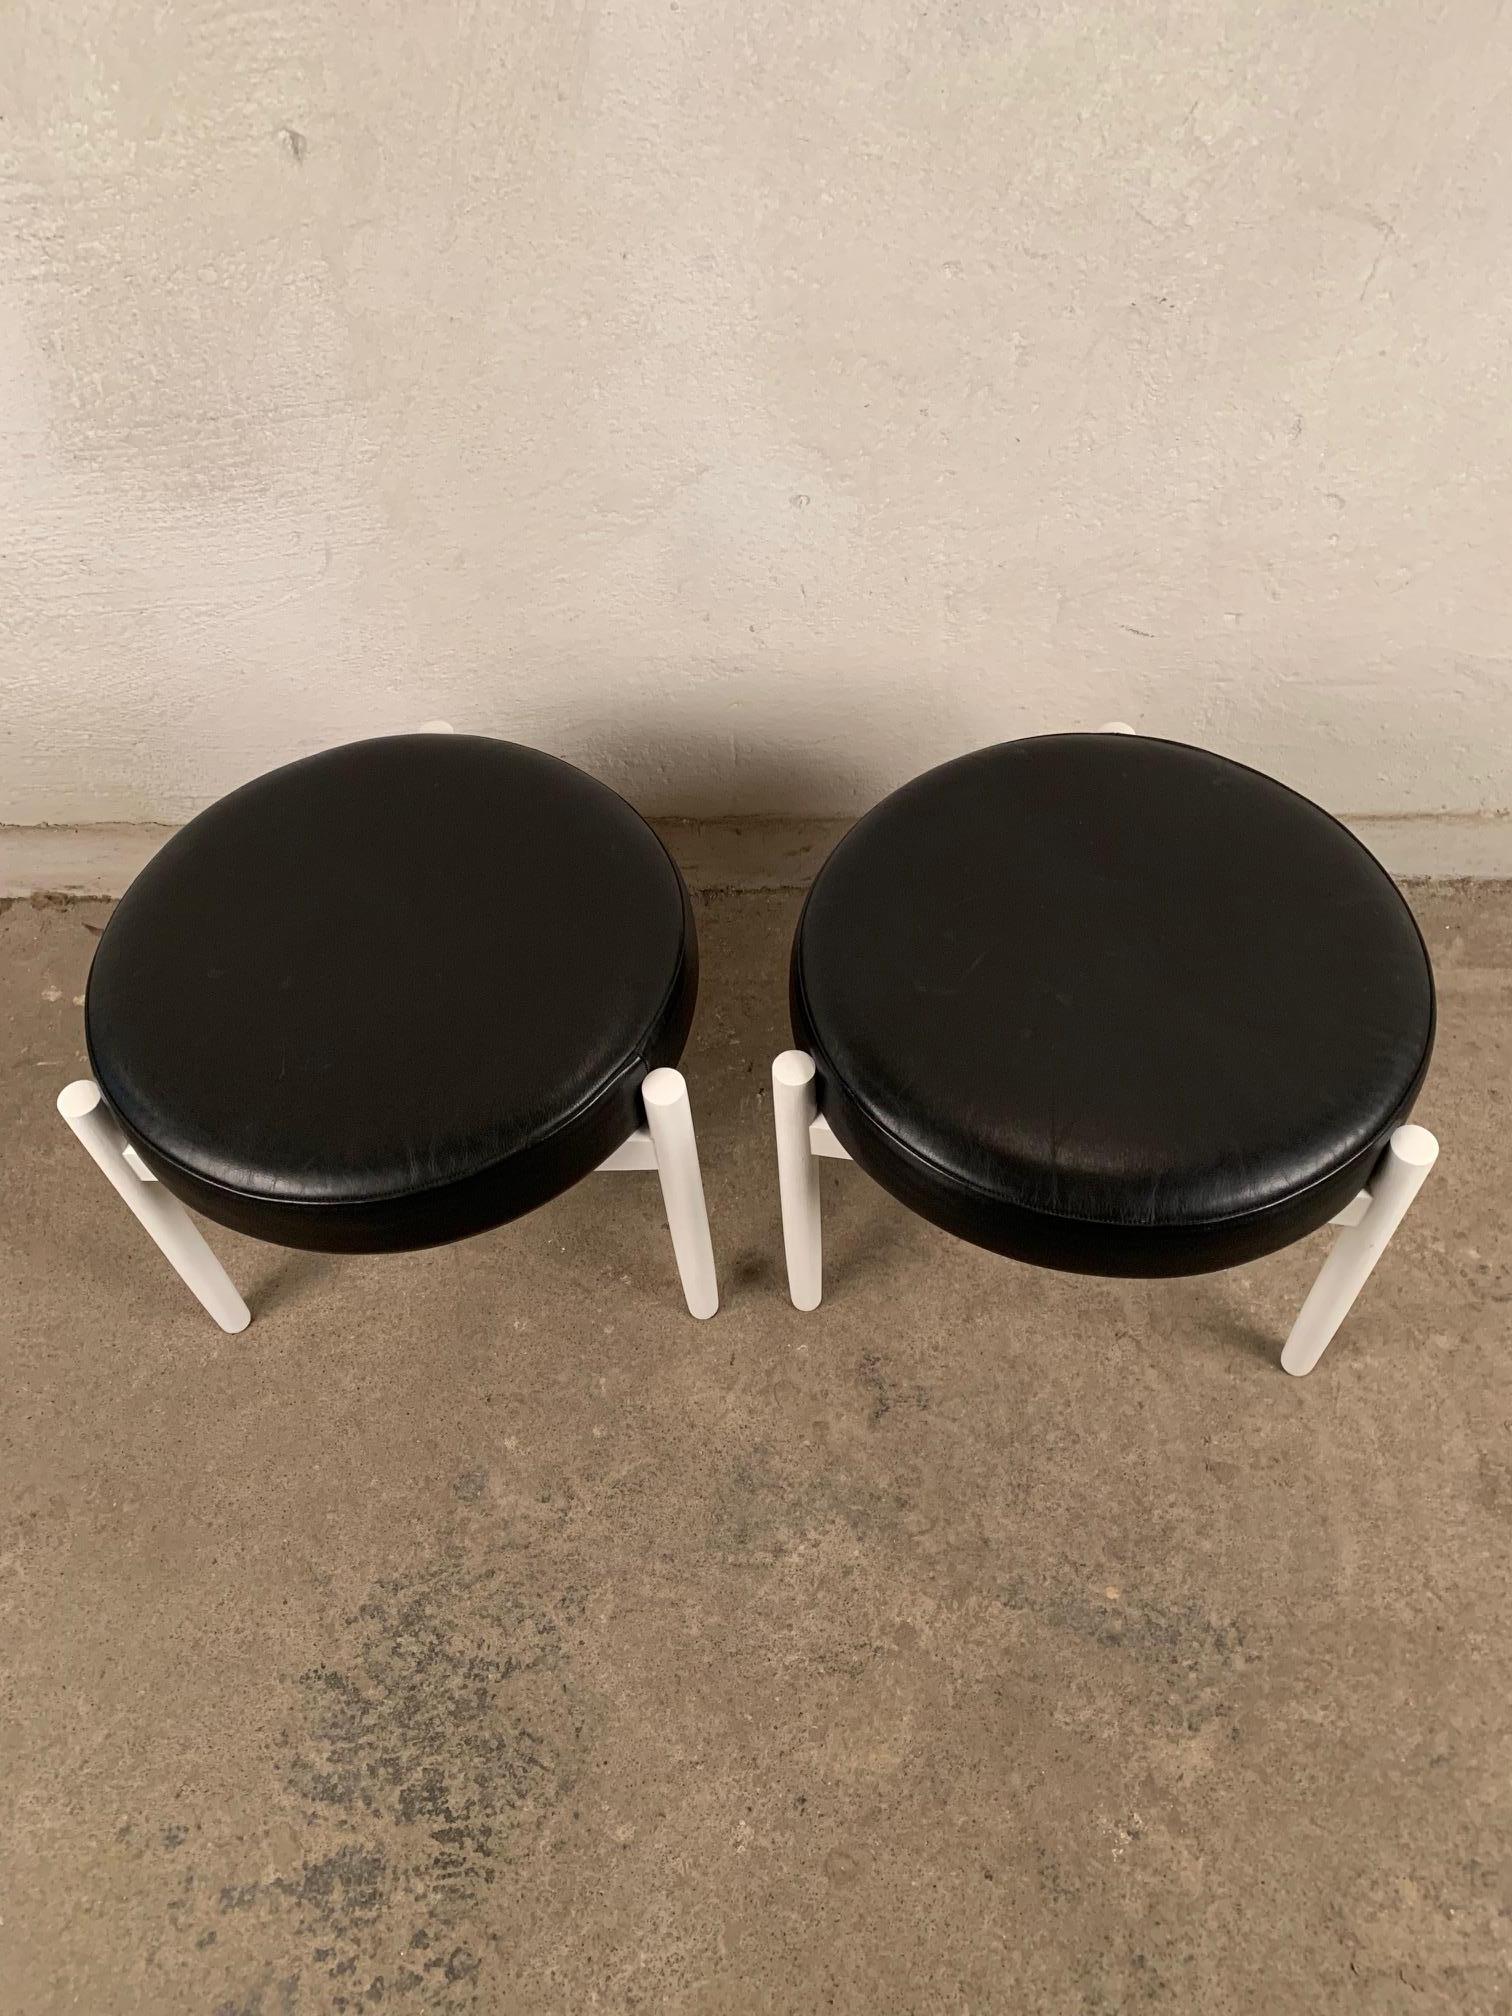 A pair of Danish stools, designed by Hugo Frandsen, Spottrup from the 1960s. In original condition and signed. Seats made of high quality leather. The frame and legs are made of ashwood. Stools are a Classic Danish design.